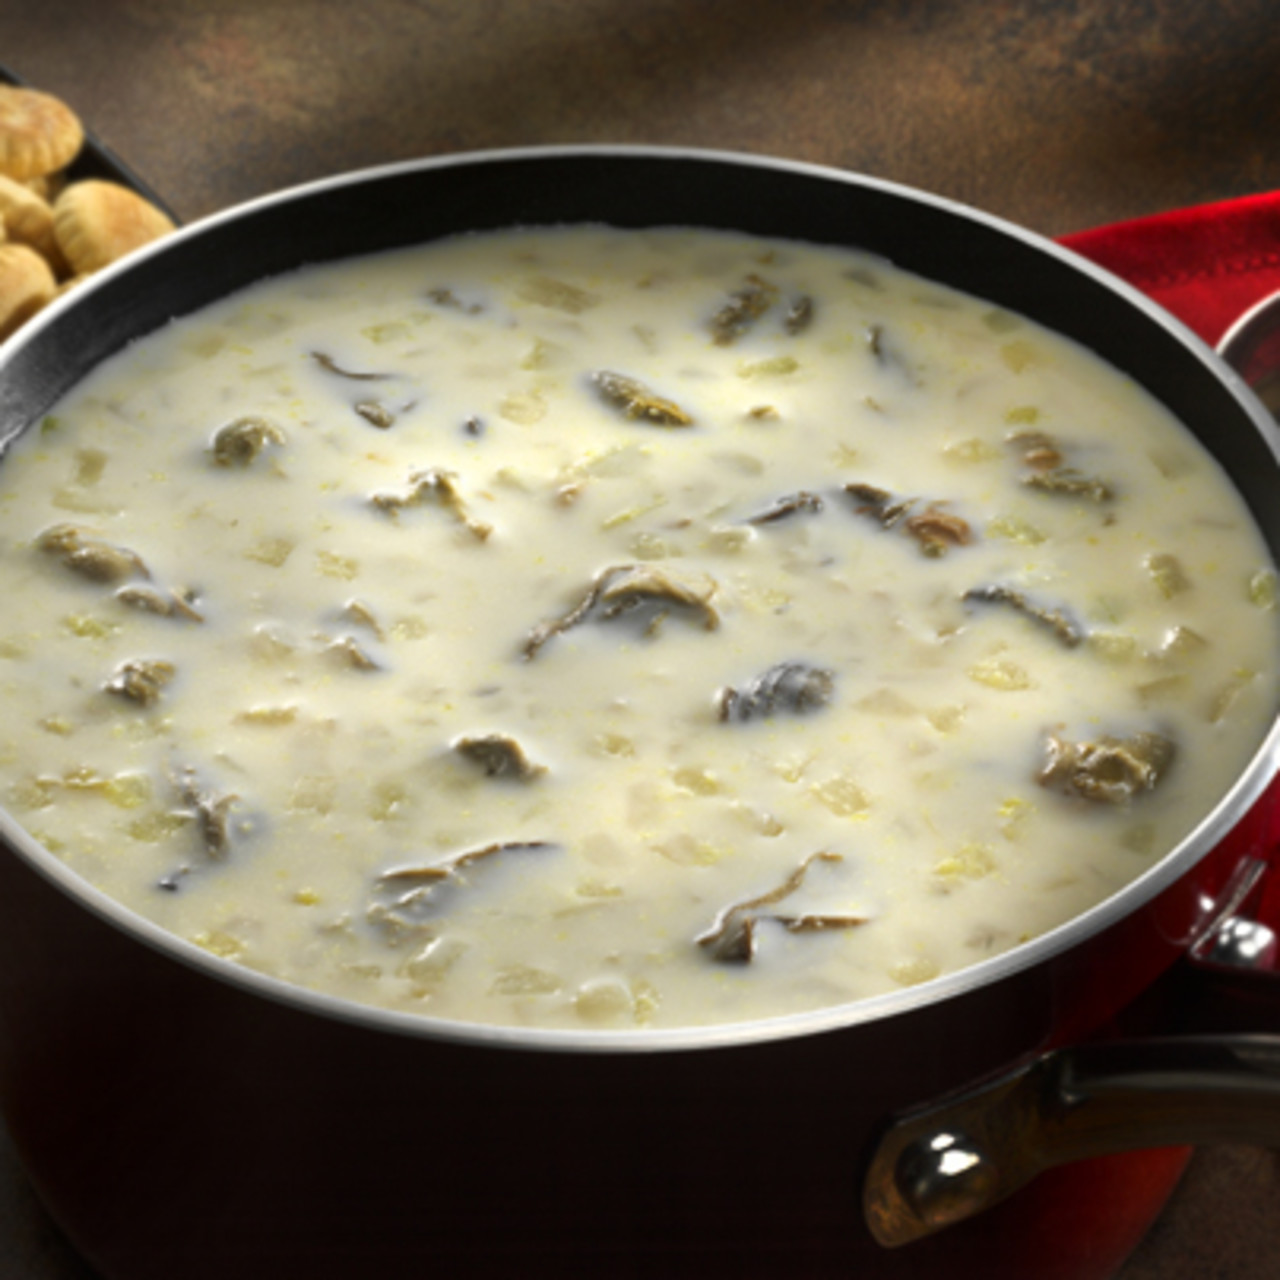 https://bigoven-res.cloudinary.com/image/upload/t_recipe-1280/oyster-stew-vickis.jpg